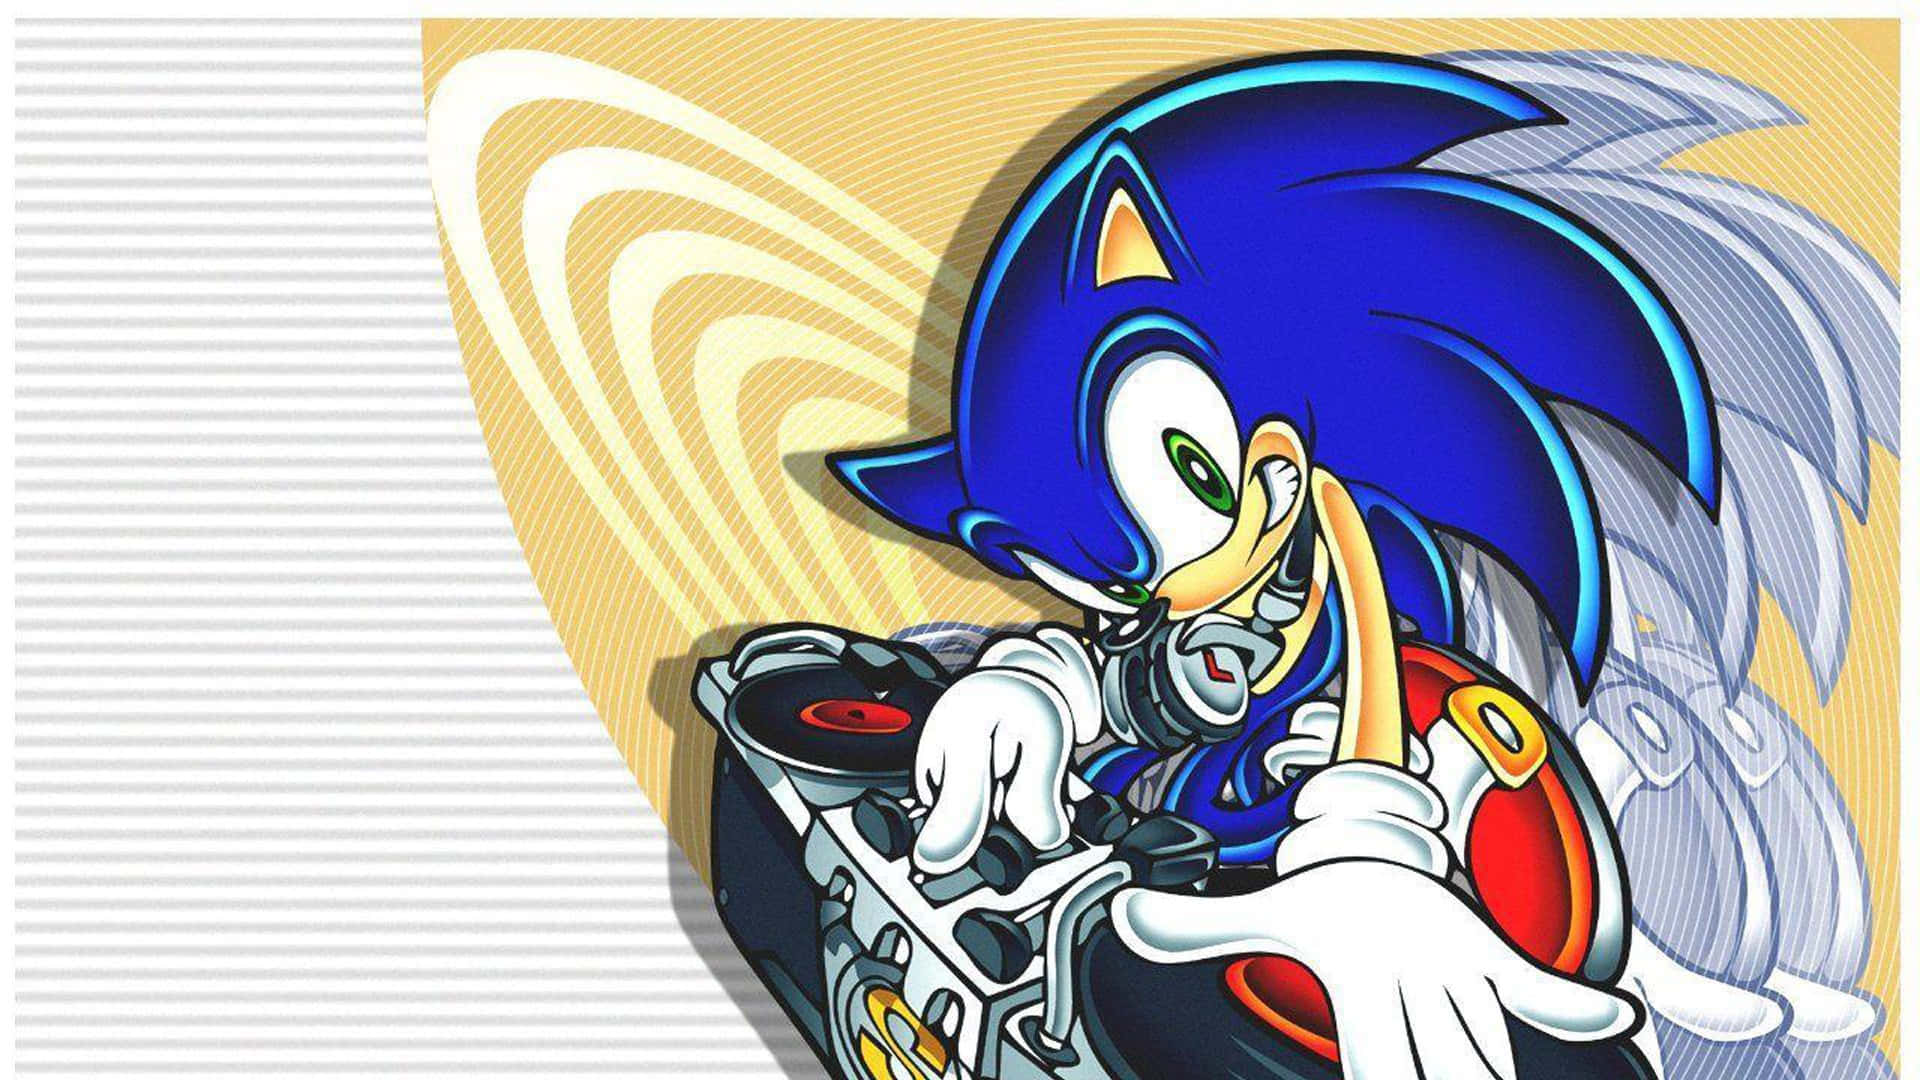 Sonic Art - The Fastest Hedgehog in Action Wallpaper